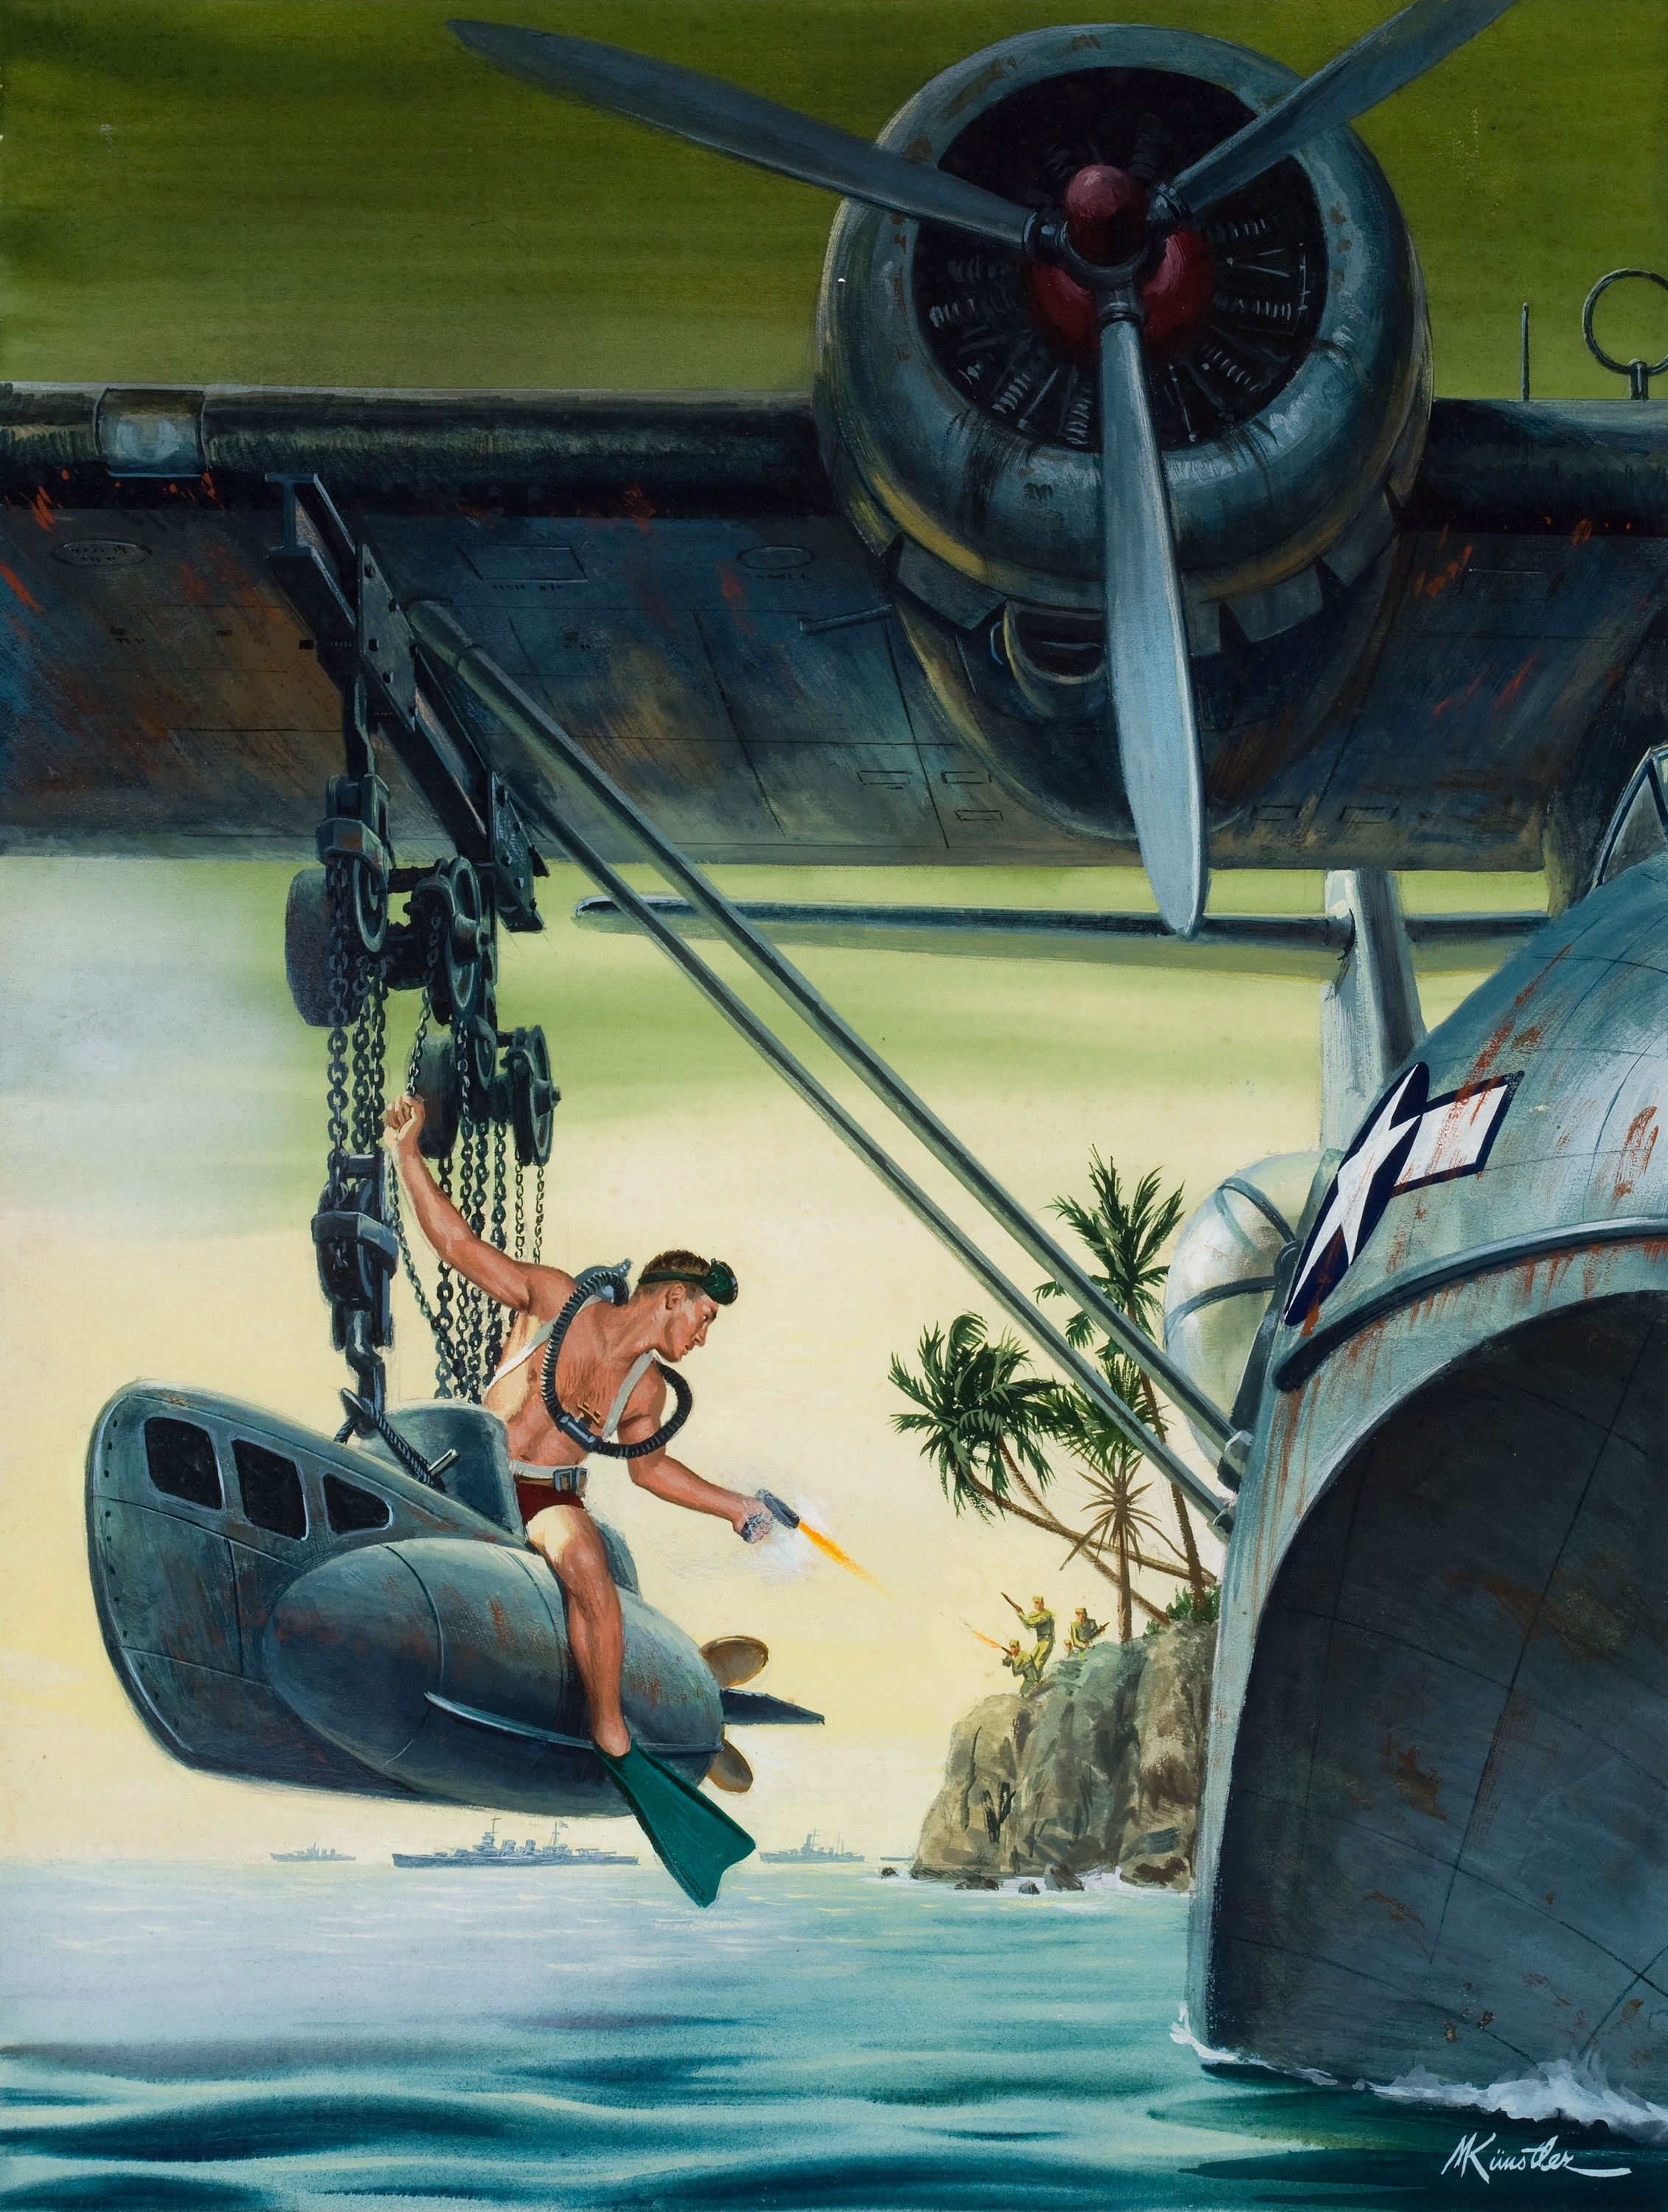 25232365-The_Hell-Raising_Yank_and_His_Remarkable_Flying_Sub_Male_cover_illustration.jpg